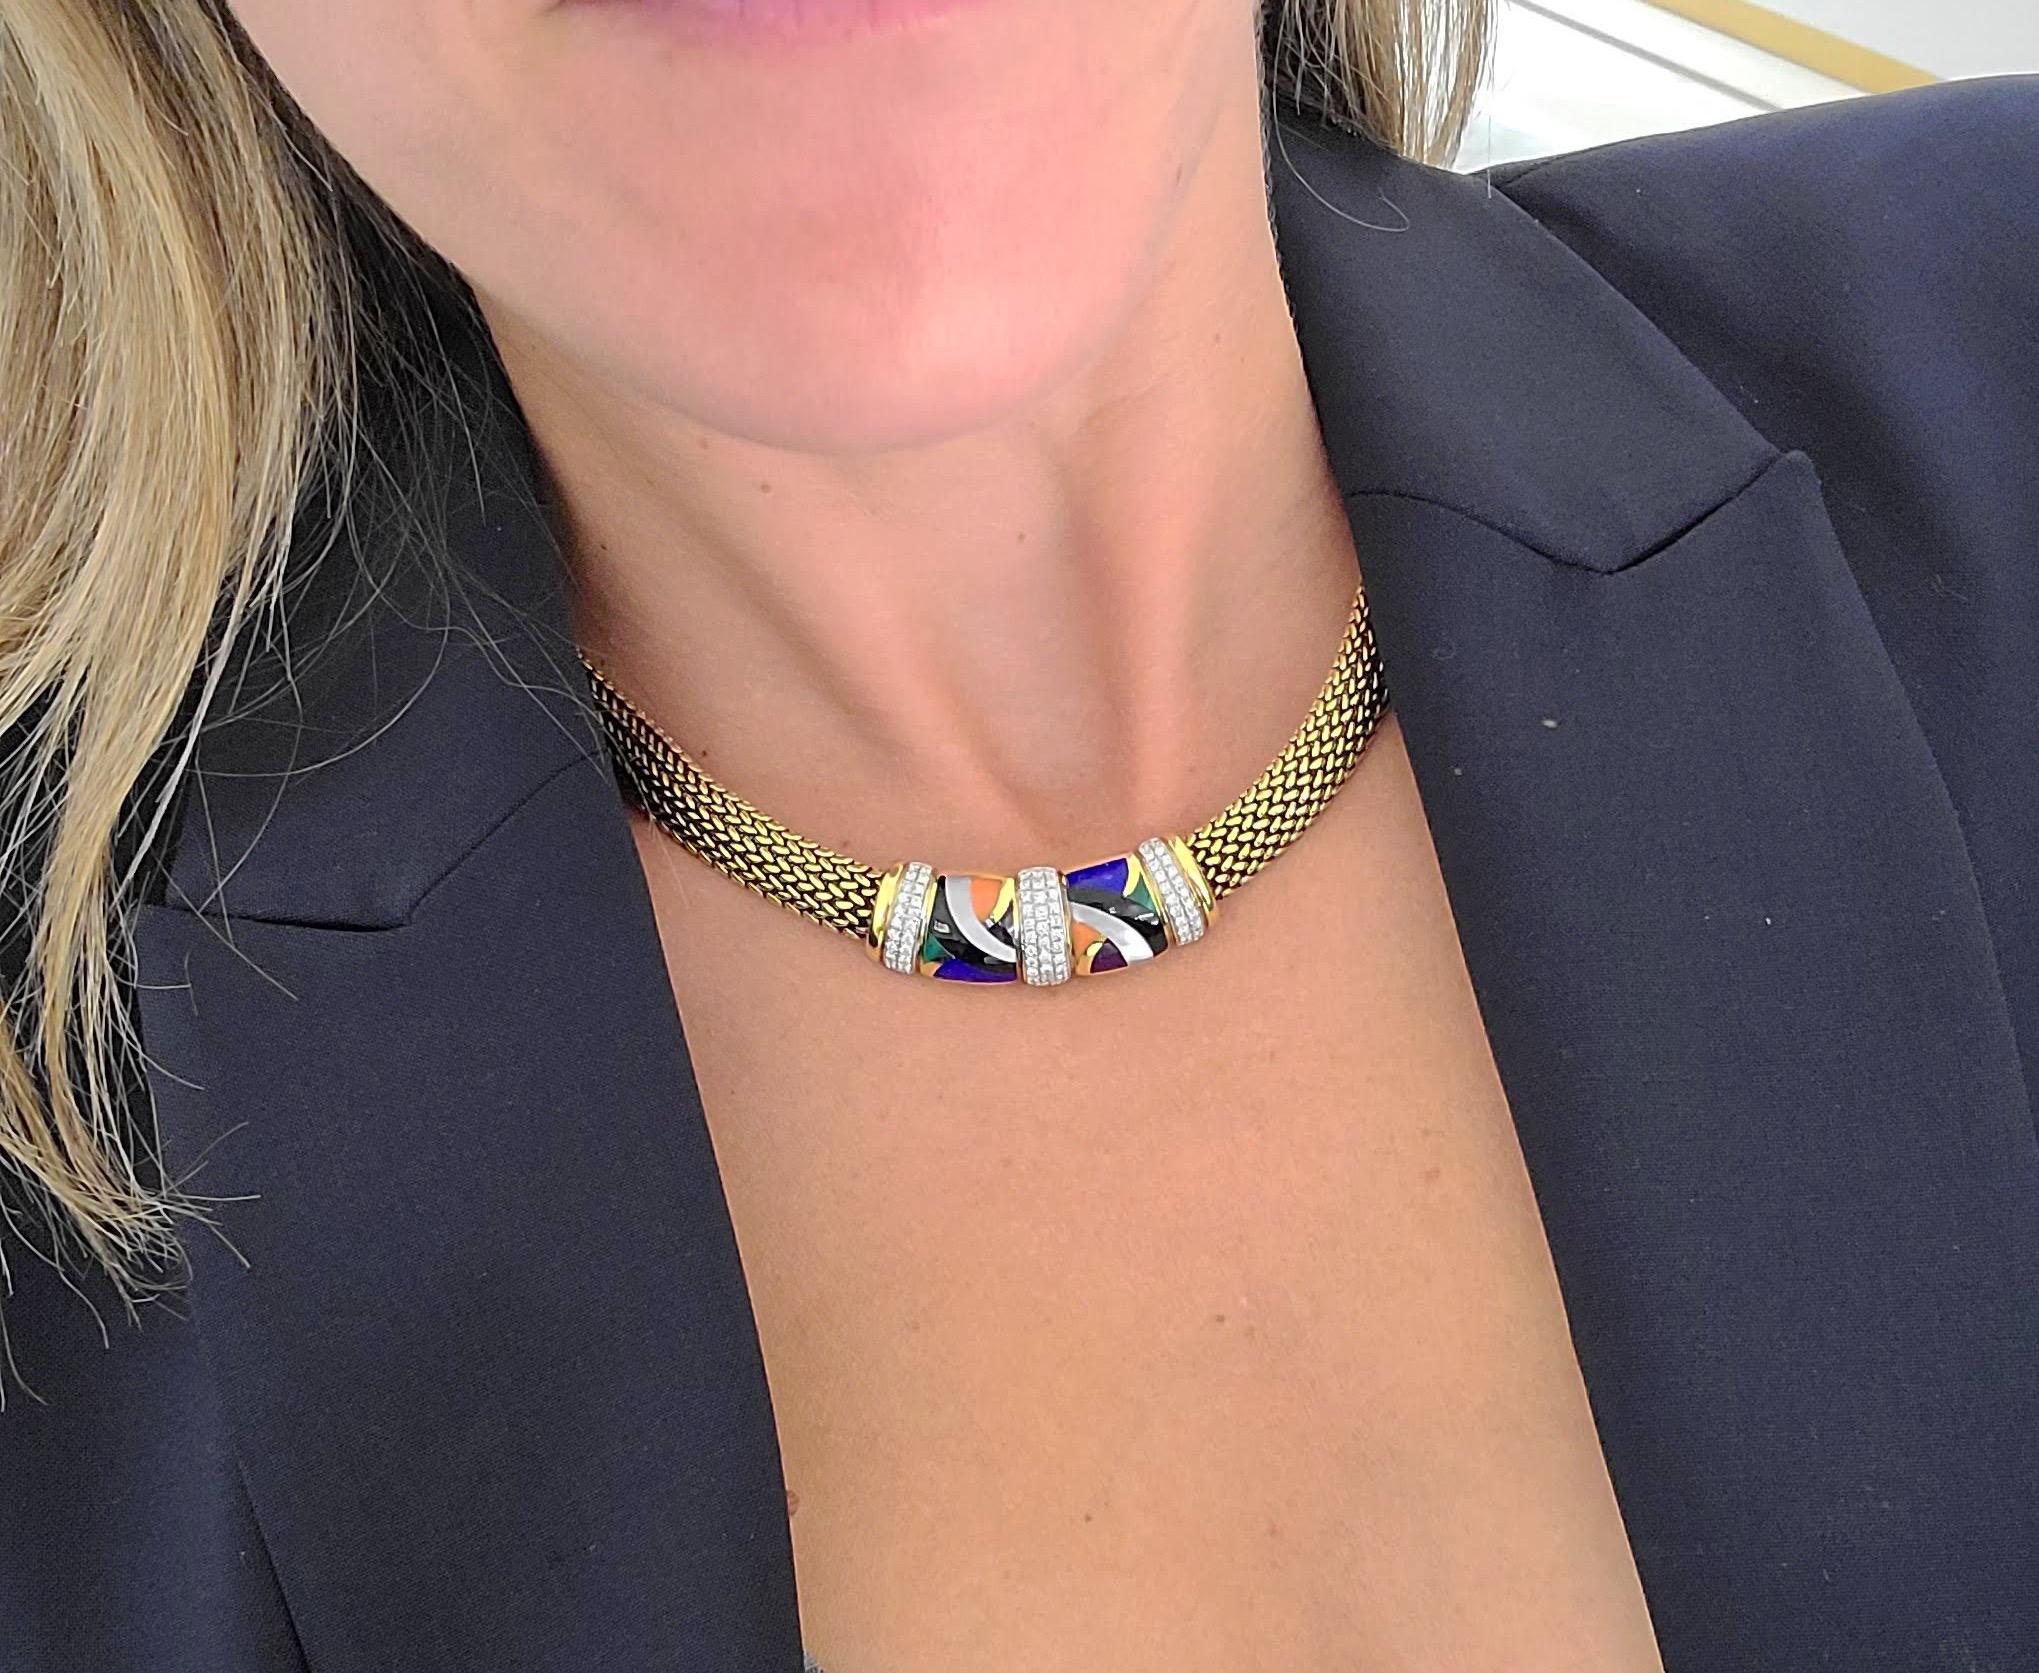 Available at Cellini Jewelers NYC, This beautiful Asch Grosbardt 18 karat yellow gold necklace is designed with a yellow gold bombe mesh chain. The centerpiece is inlaid in a geometric motif of Black Onyx, Mother of Pearl, Coral, Lapis Lazuli, &